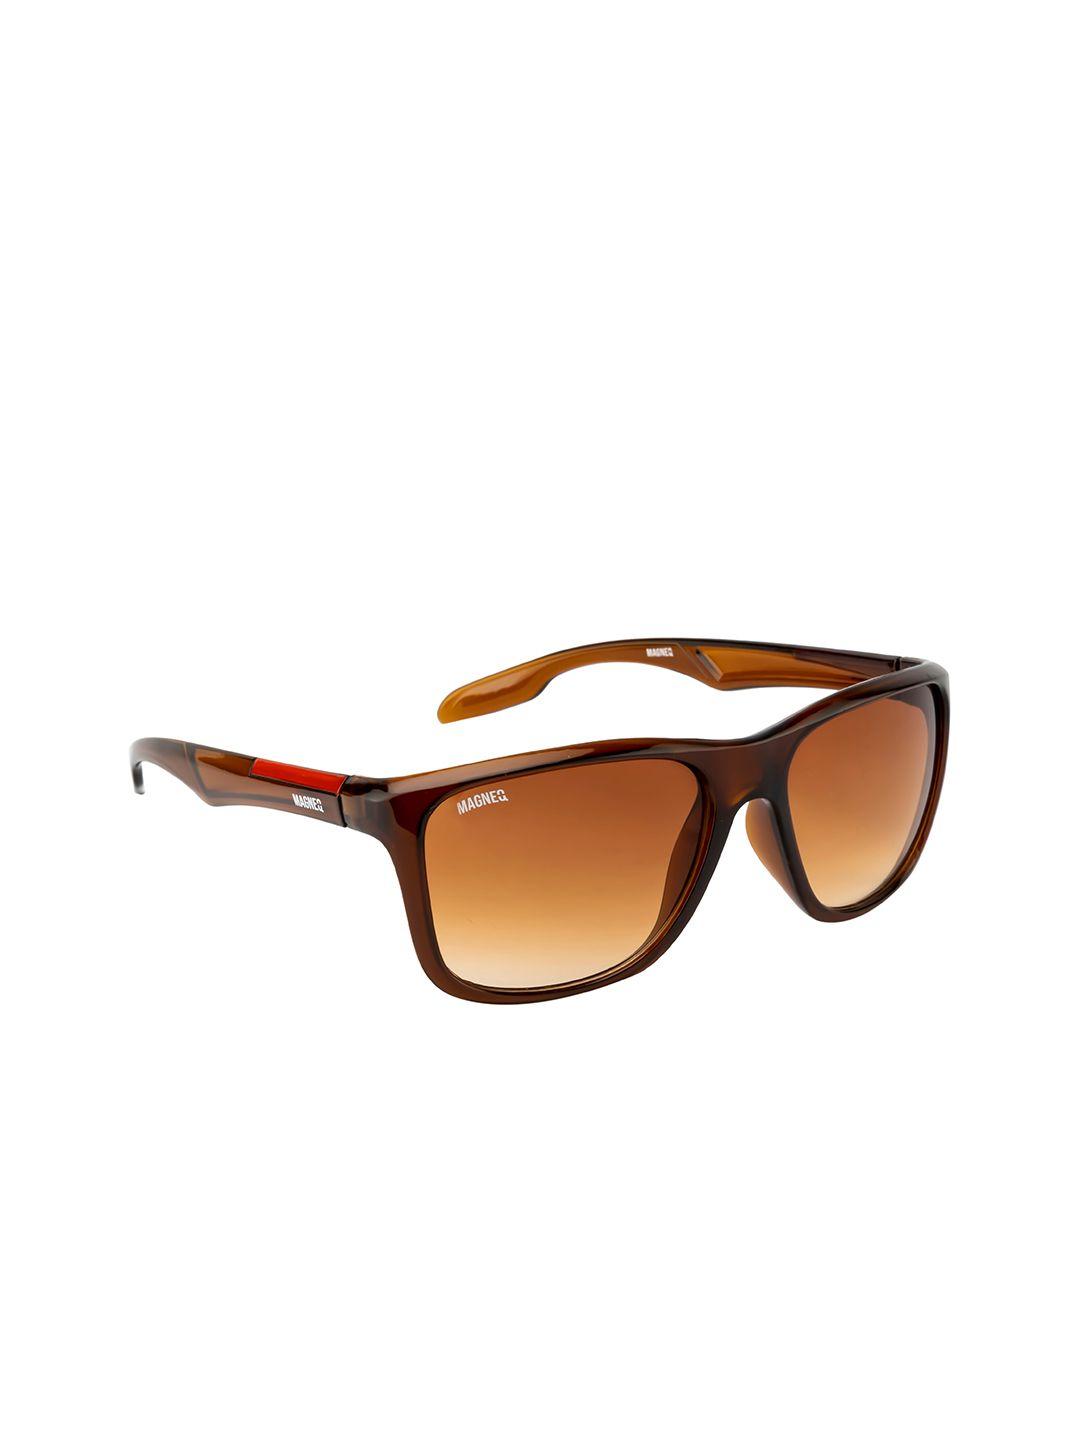 magneq lens & cateye sunglasses with polarised & uv protected lens mg 1626/s c1 5518